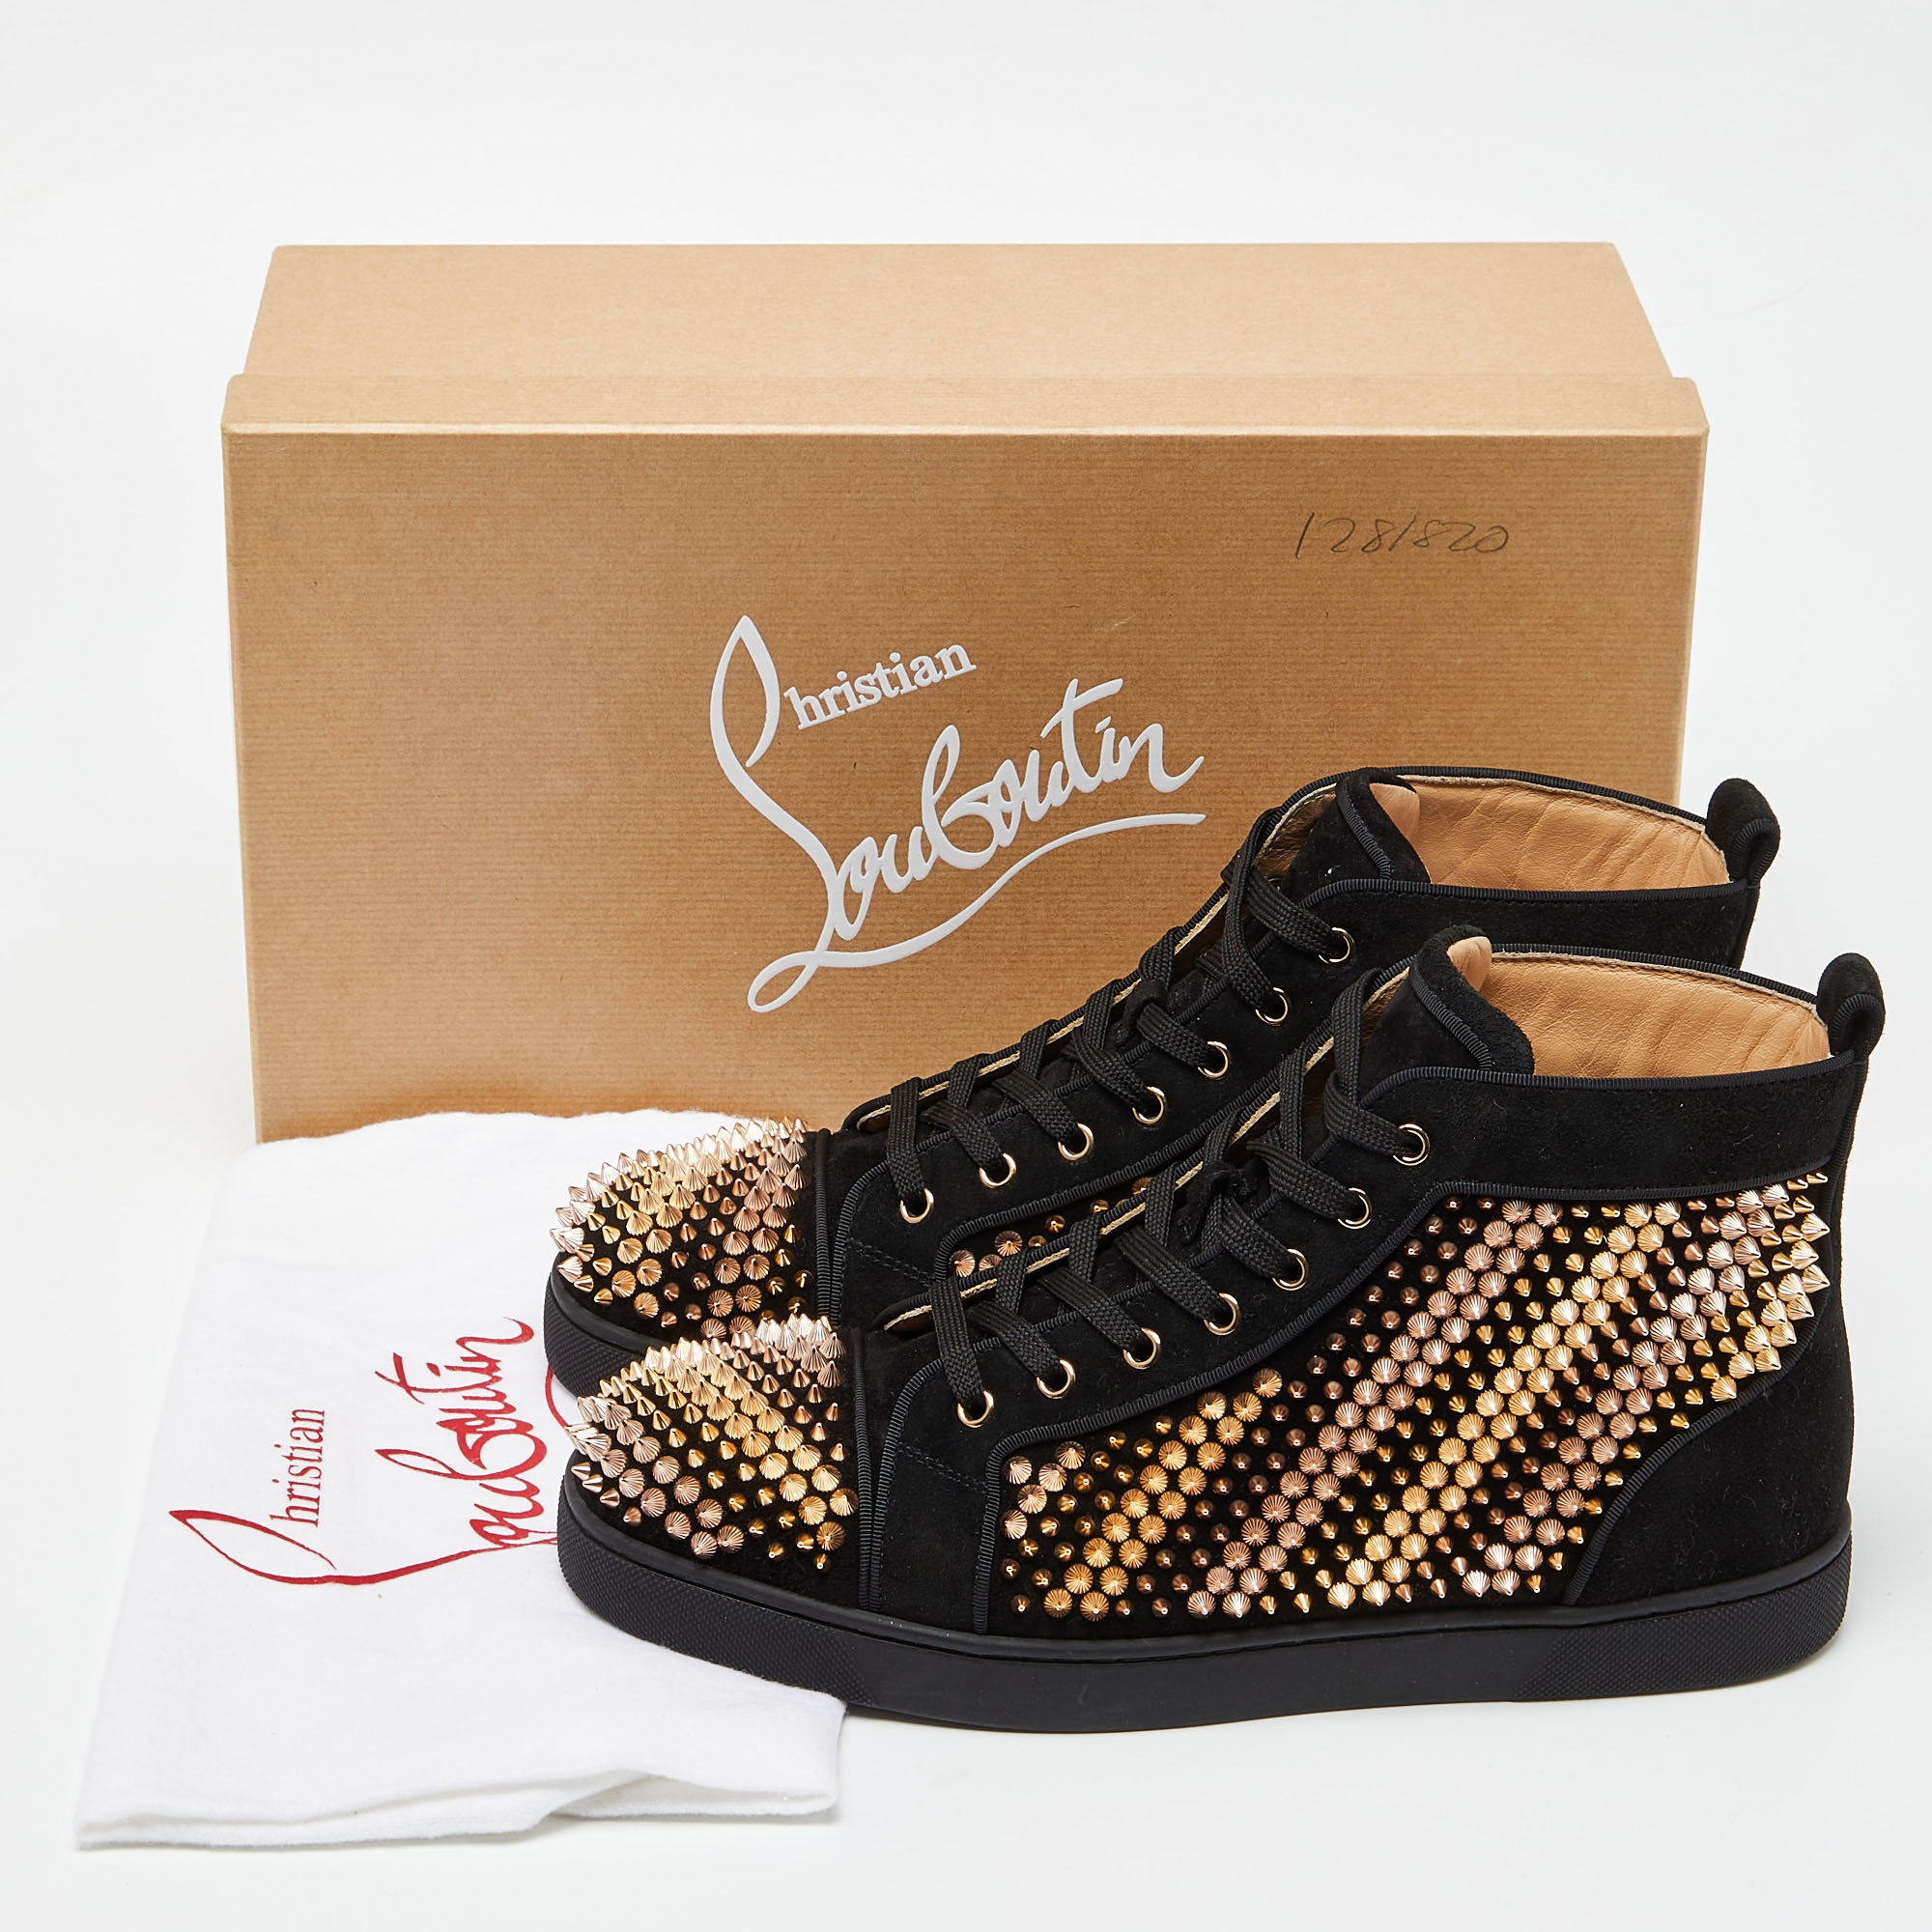 Christian Louboutin Black Suede Louis Spike Sneakers Size 43